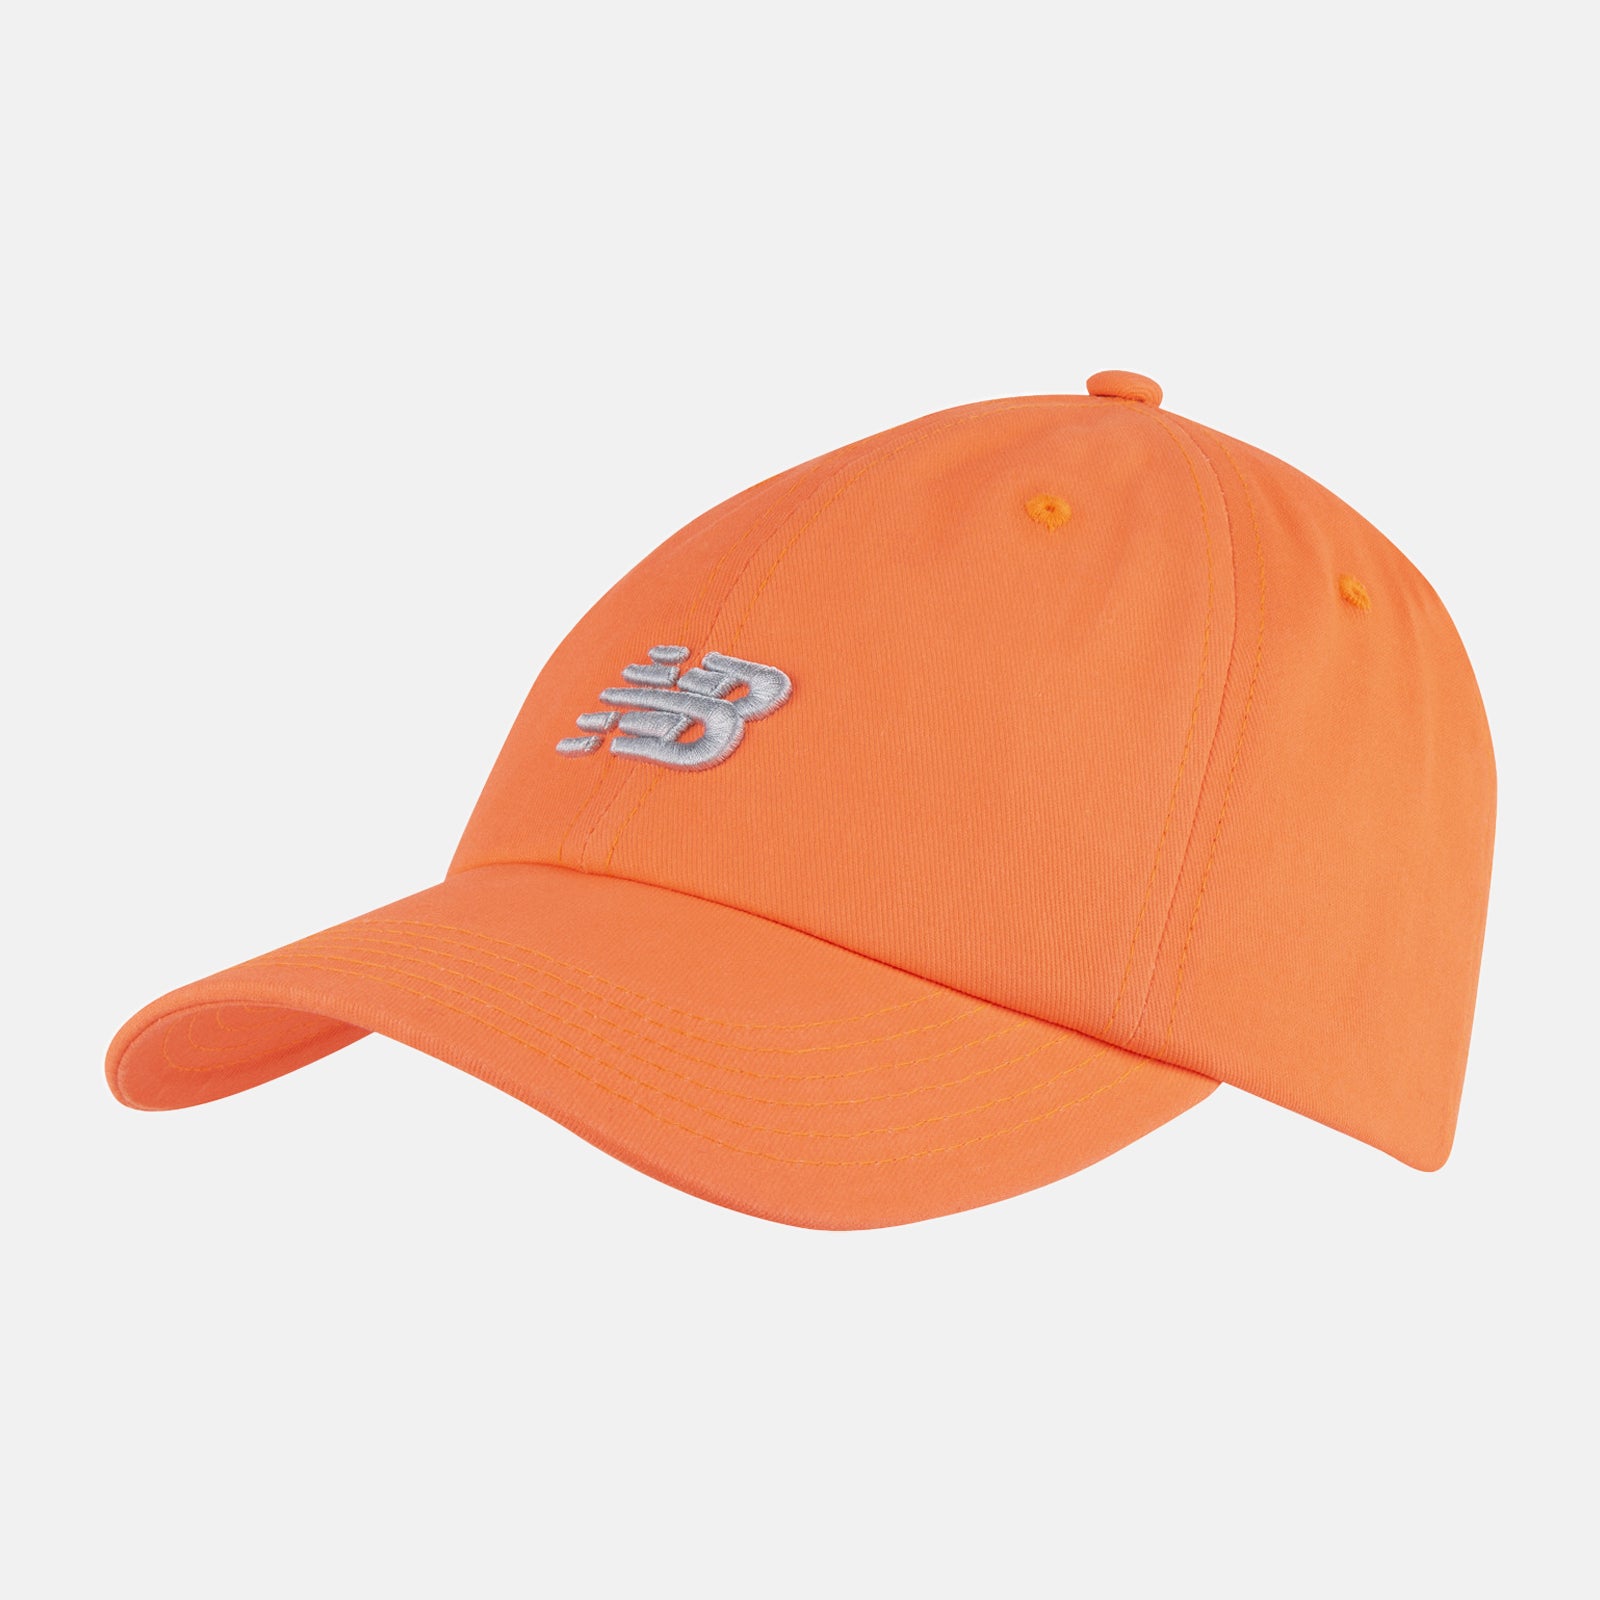 NEW BALANCE 6-Panel Curved Brim NB Classic Hat in Neon Orange LAH91014 O/S NEON DRAGON FLY FROM EIGHTYWINGOLD - OFFICIAL BRAND PARTNER